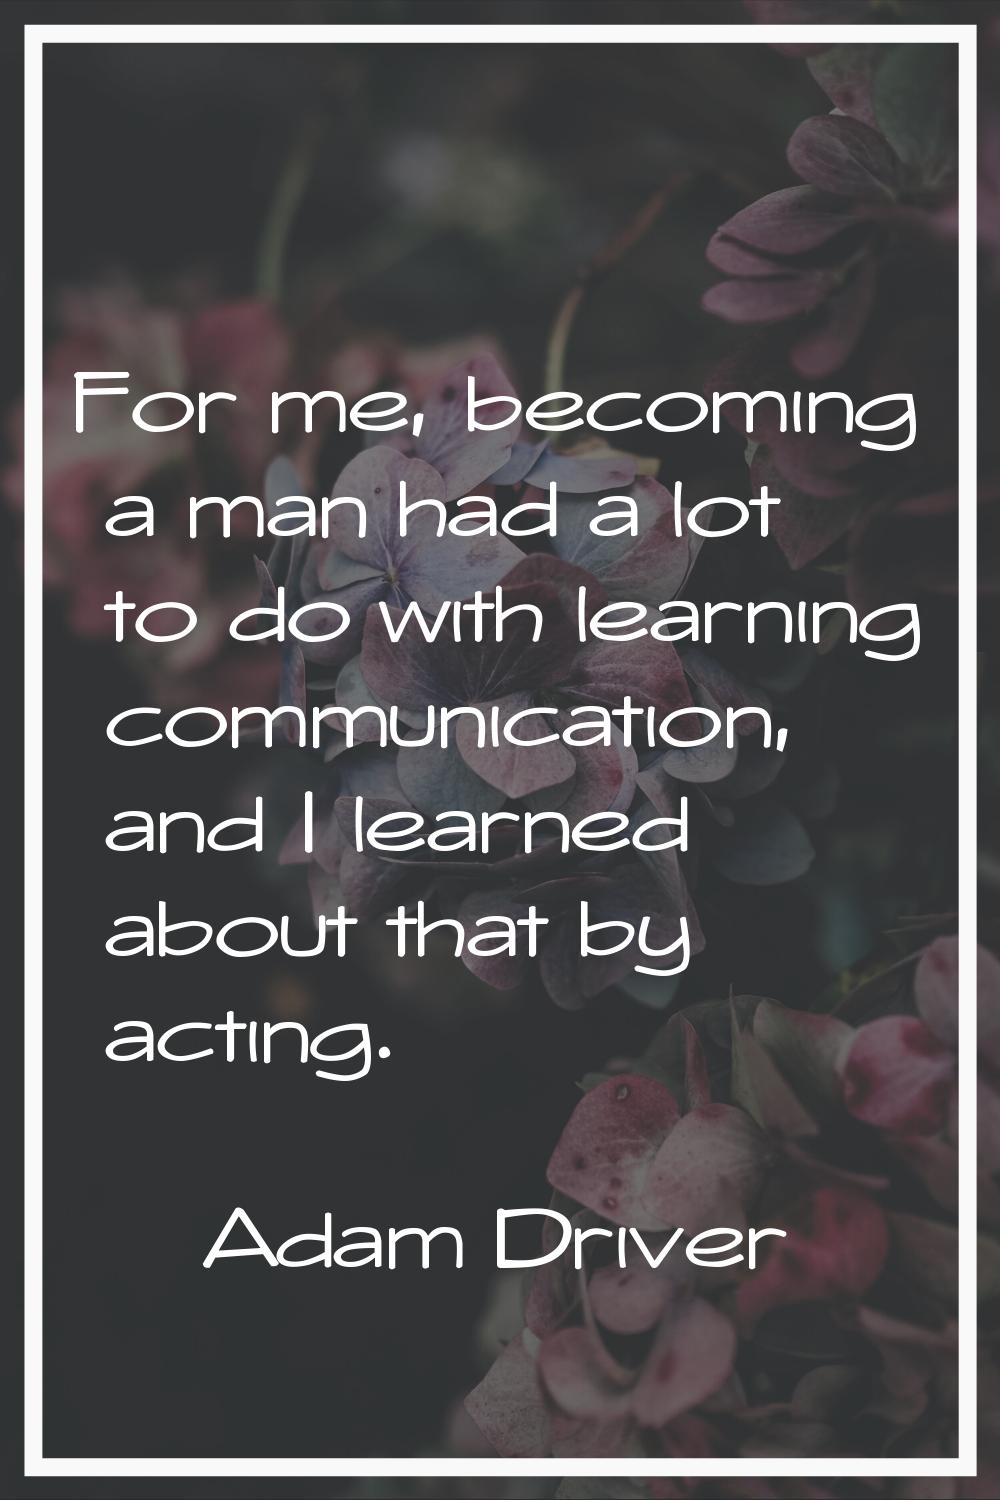 For me, becoming a man had a lot to do with learning communication, and I learned about that by act